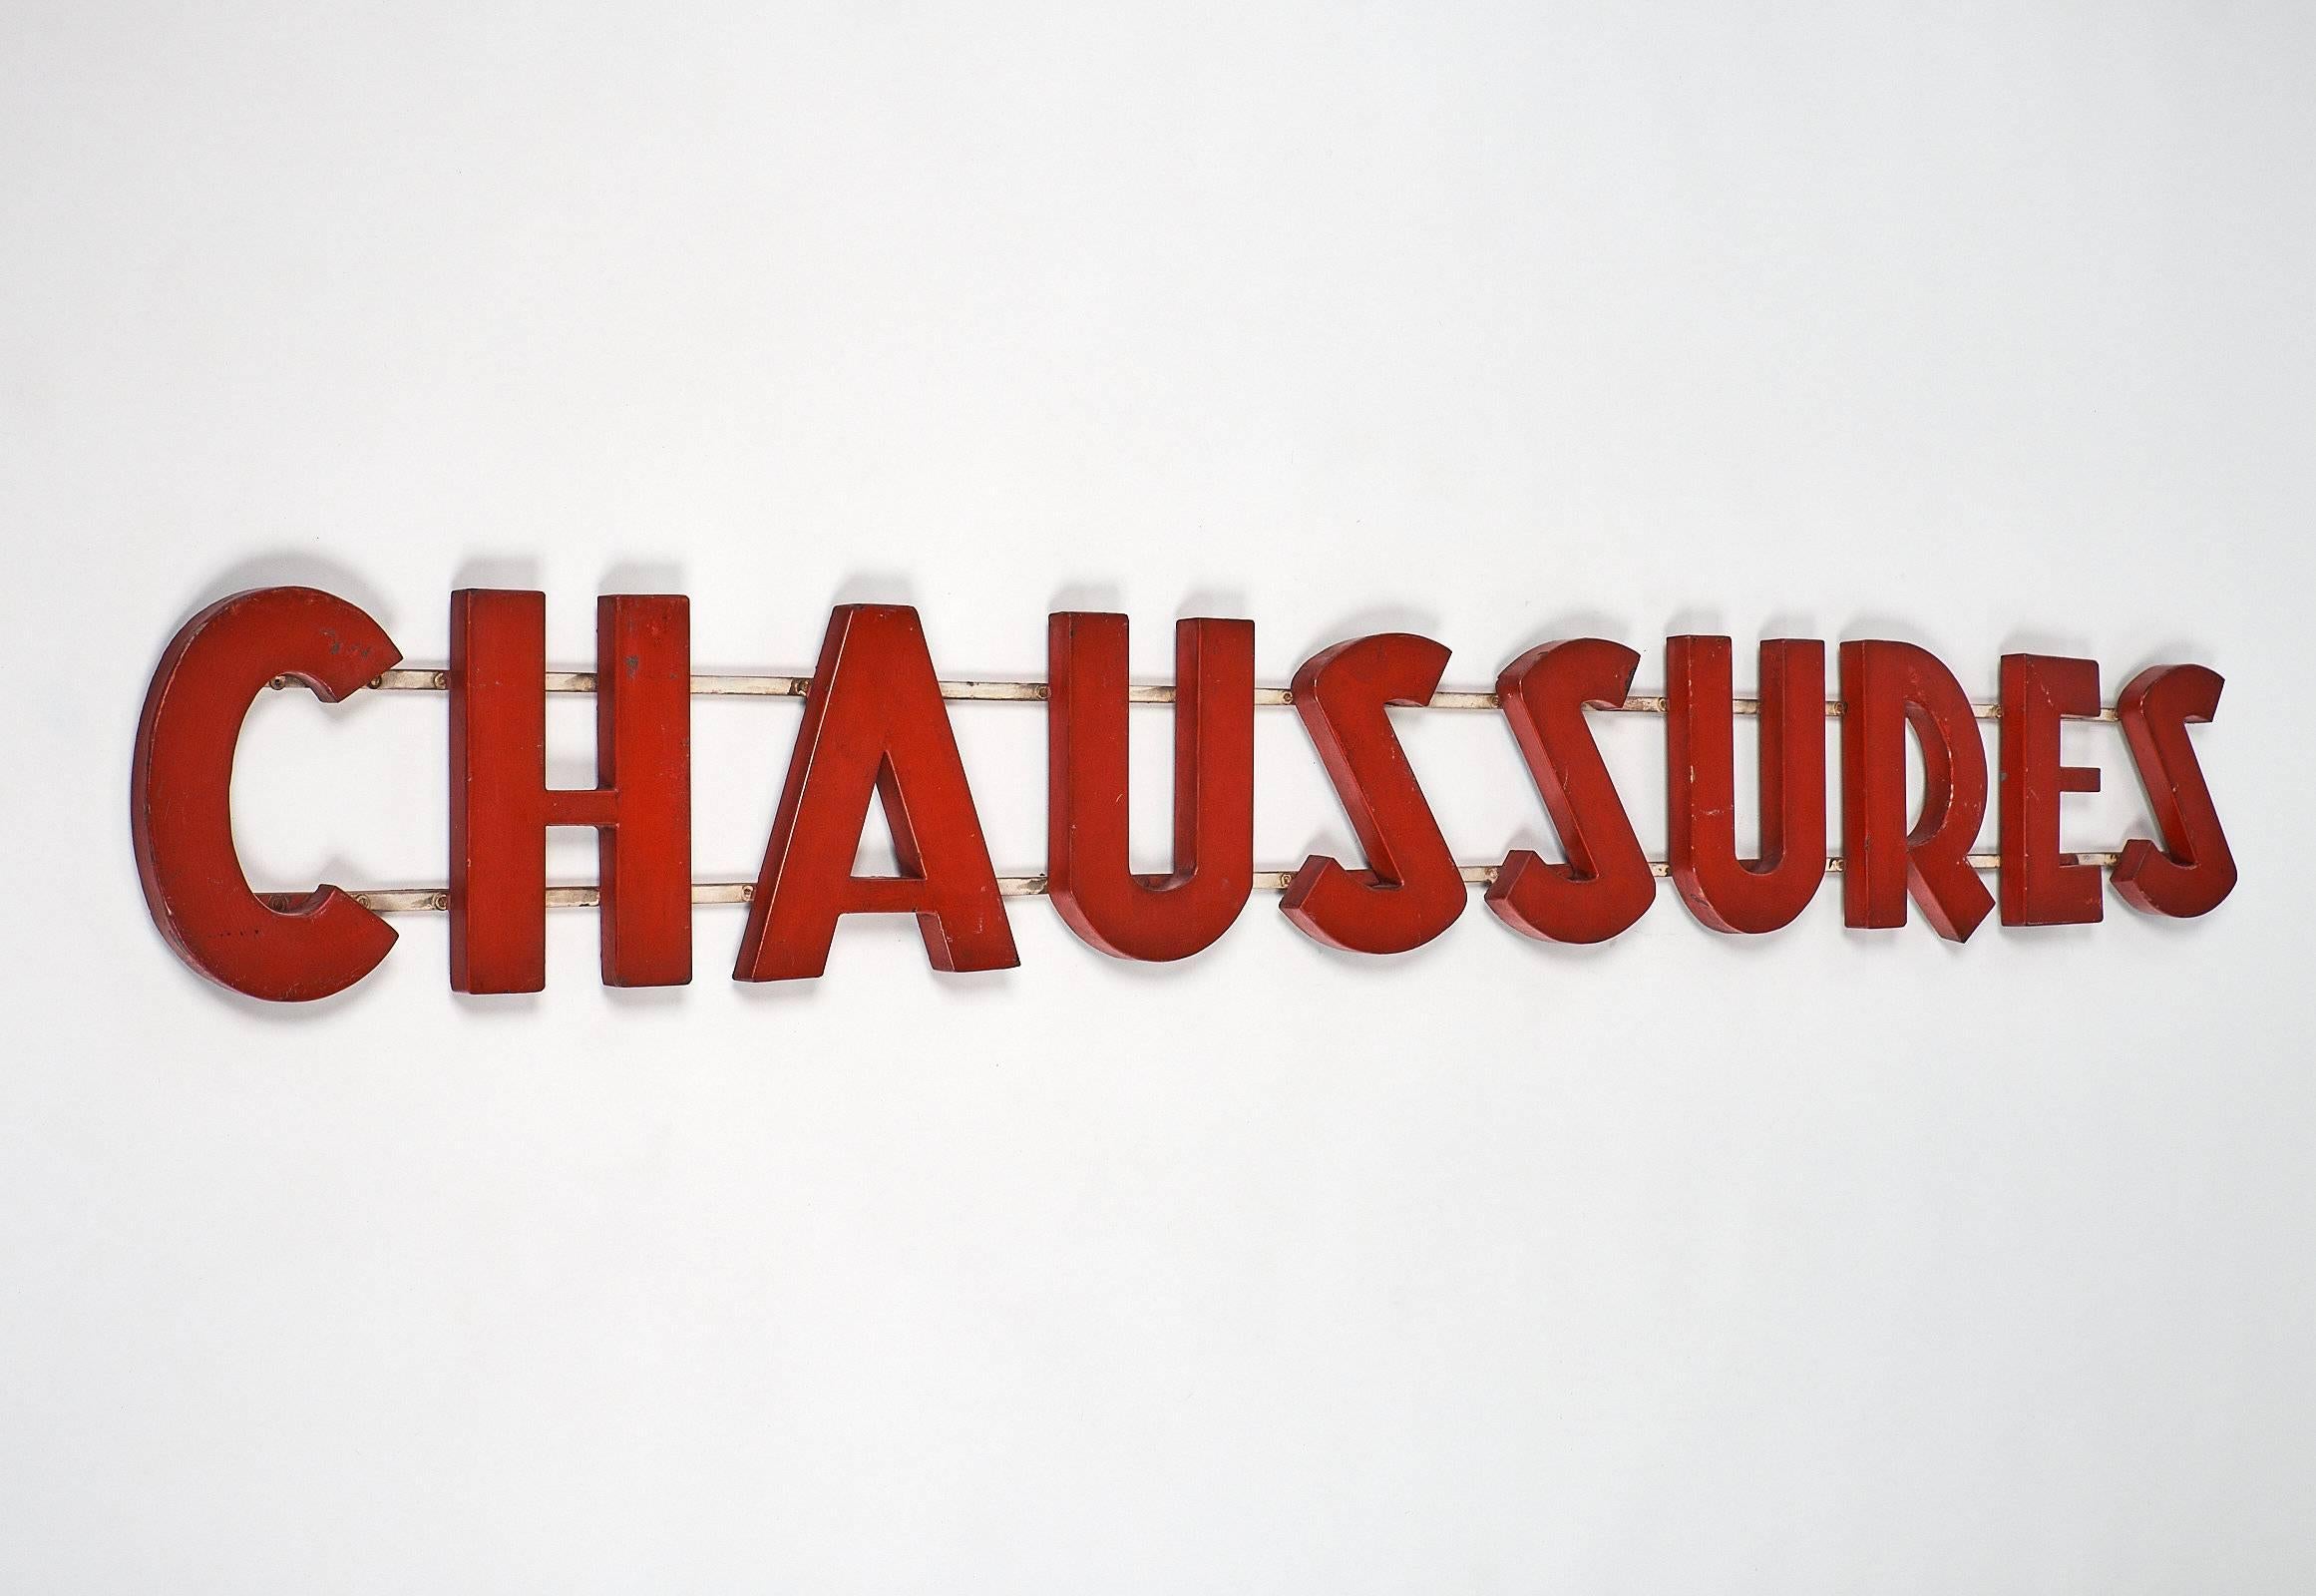 Fun French vintage store sign made of painted metal. We loved the striking red color of this authentic sign. The word “chaussures” means shoes in French.